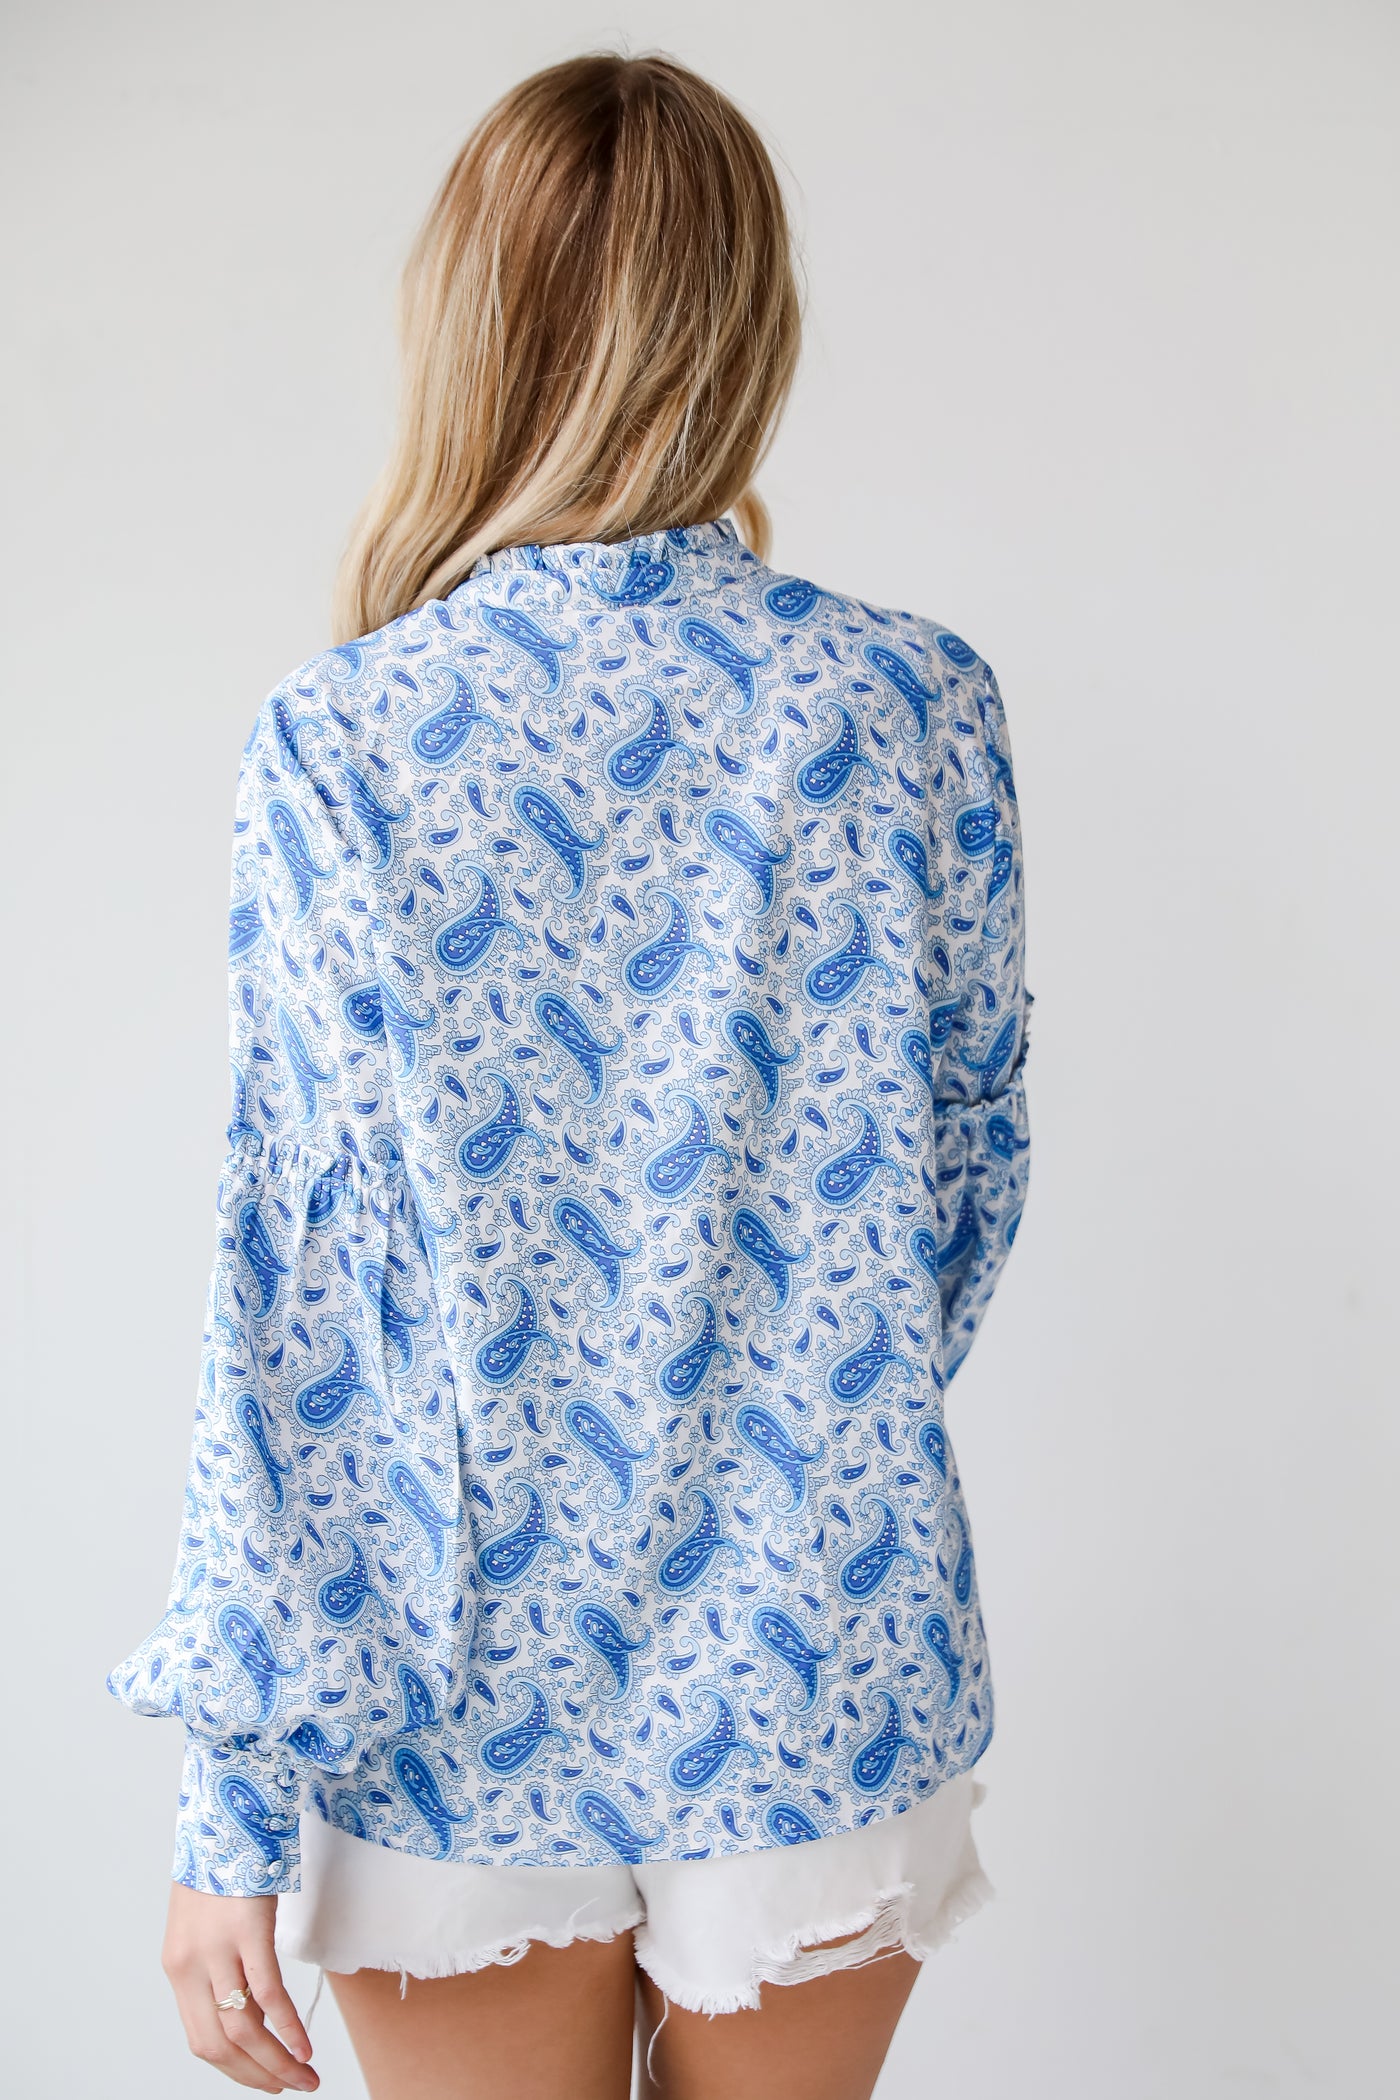 blue button up blouse, Blue Paisley Blouse, Truly Delightful Blue Paisley Blouse, Blue Paisley Top, Women's Top, Tops For Work